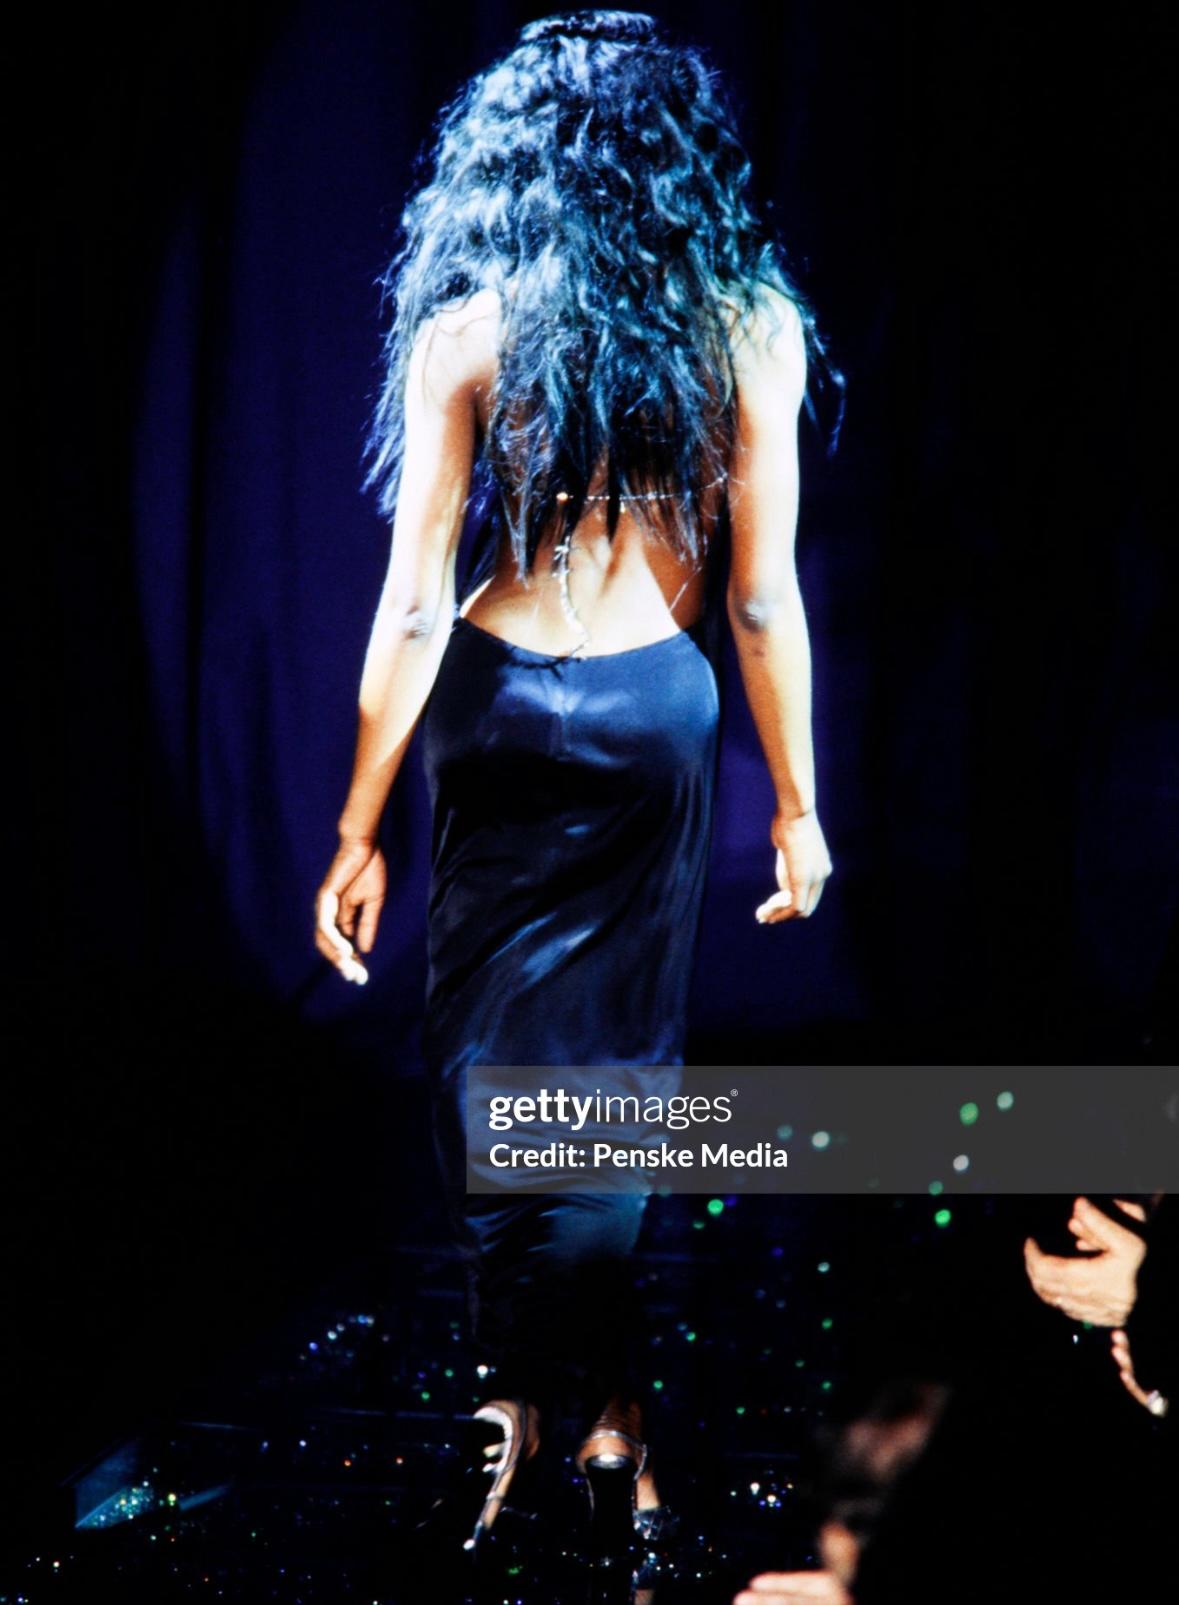 Donatella Versace designed this black backless Gianni Versace gown for the brand's Fall/Winter 1998 collection. Worn by Naomi Campbell on the runway, this gown was also highlighted in the season's ad campaign, modeled by Jade Parfitt and captured by